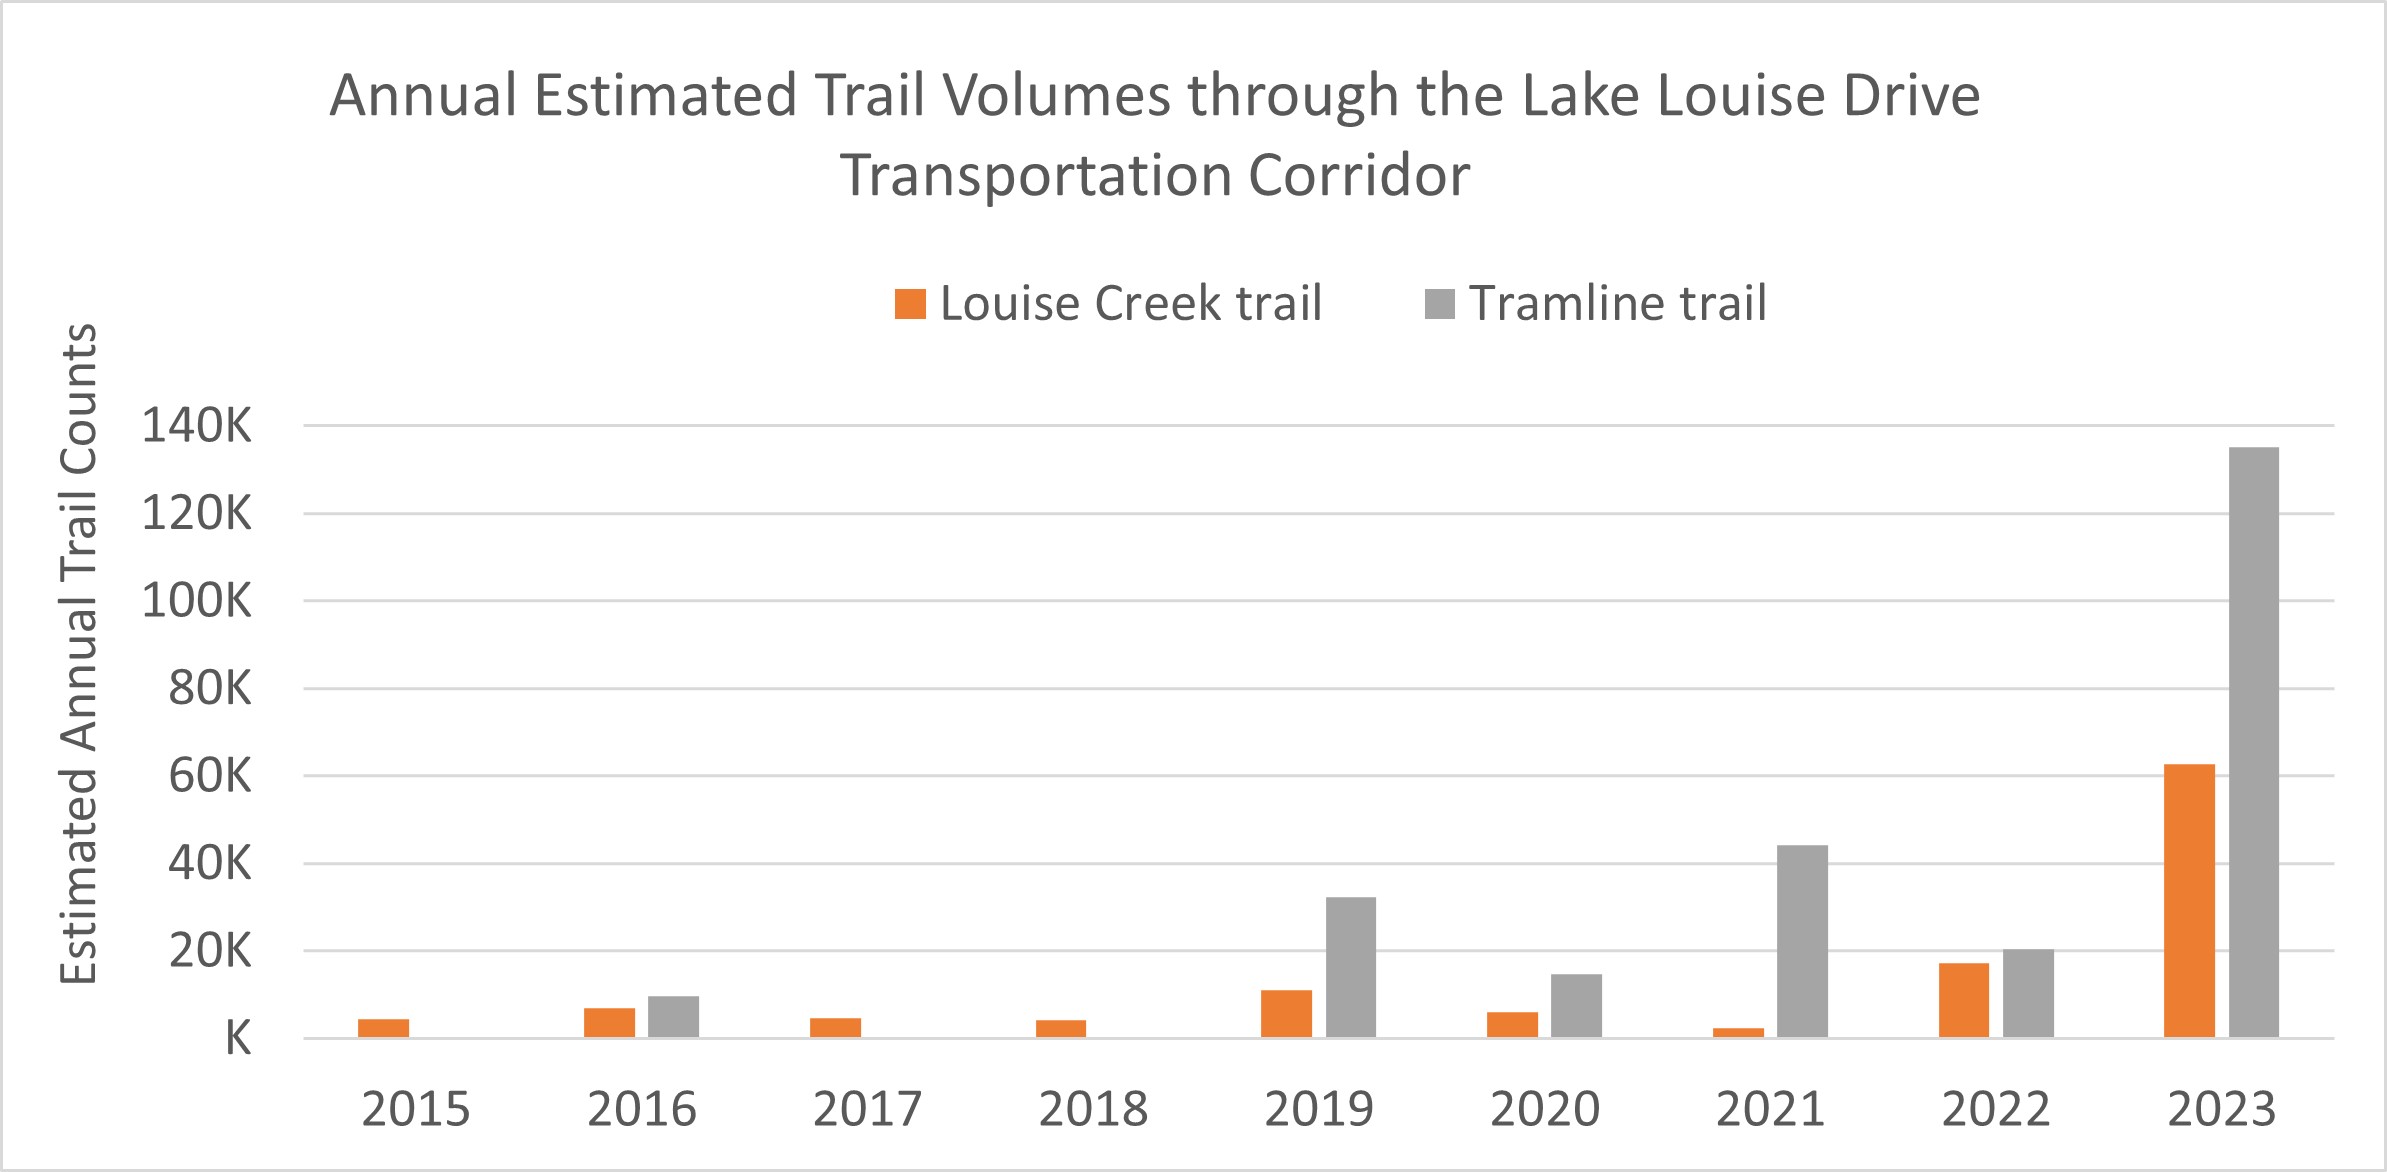 Graphic of Estimated Daily Trail Volumes (May to October) through the Lake Louise Drive Transportation Corridor. Note: Tramline Trail counter is missing data for 2015, 2017 and 2018. More details provided in the text version below. 